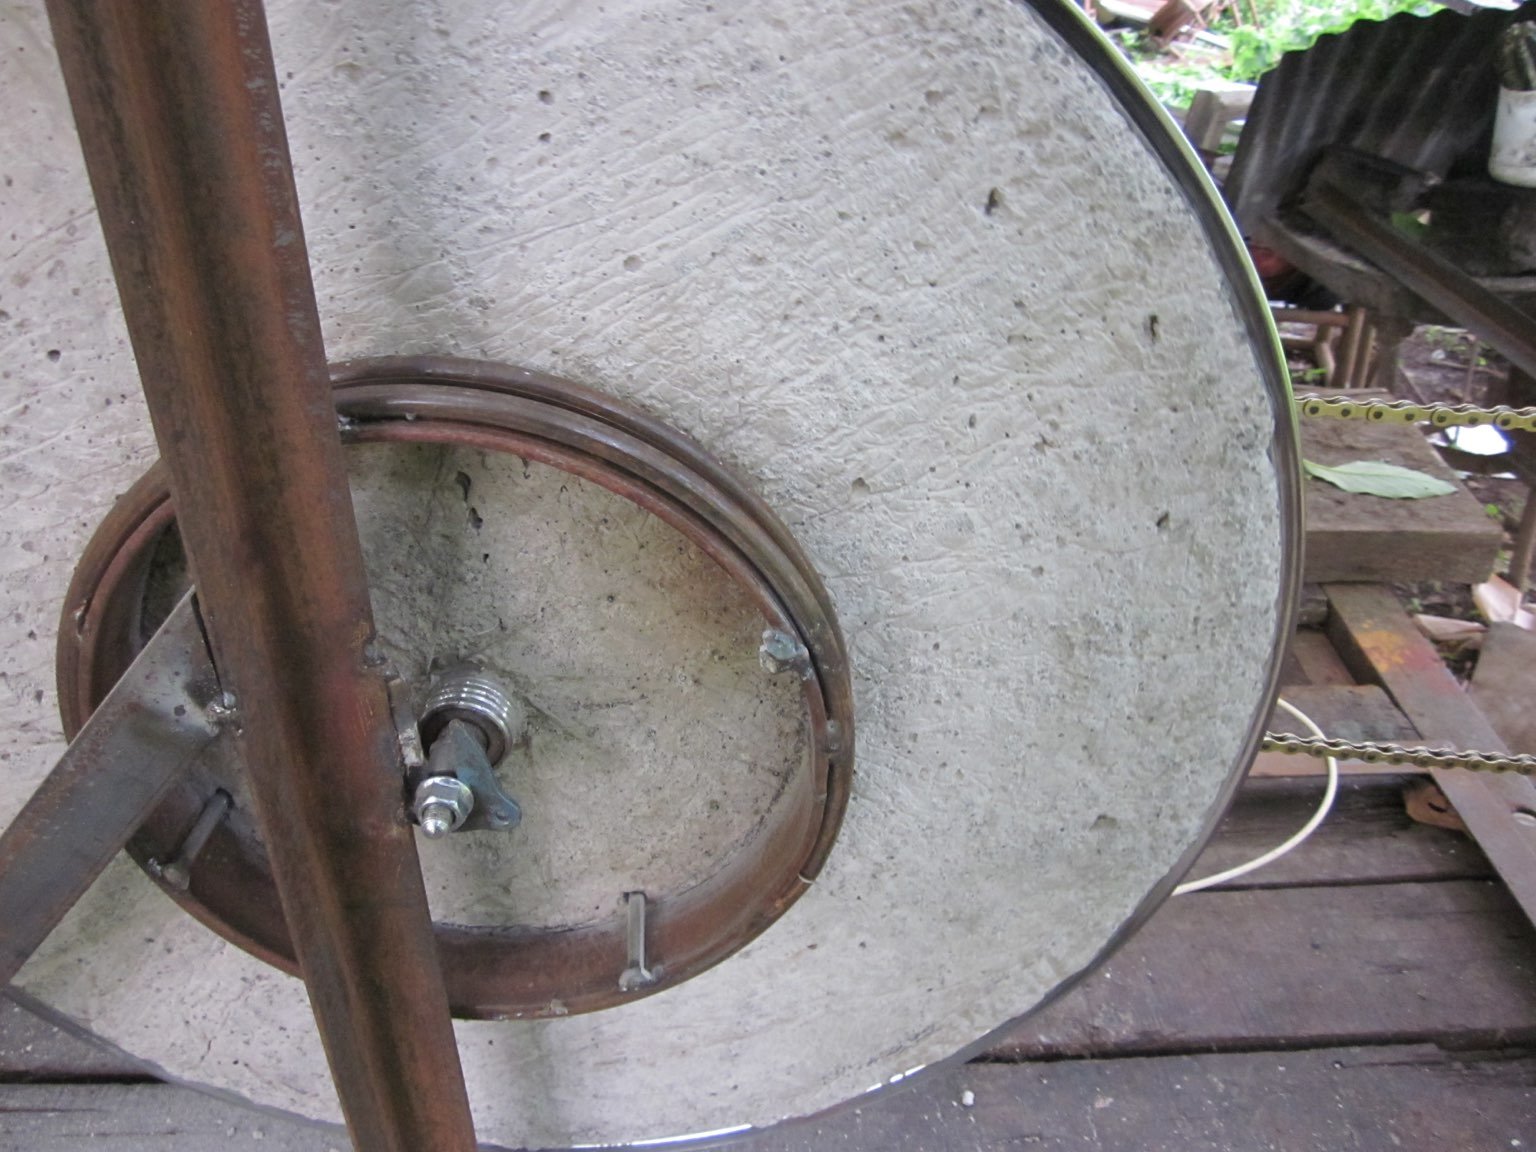 Iron bars are bent into a circle and welded together and then welded to bolts embedded in the flywheel.